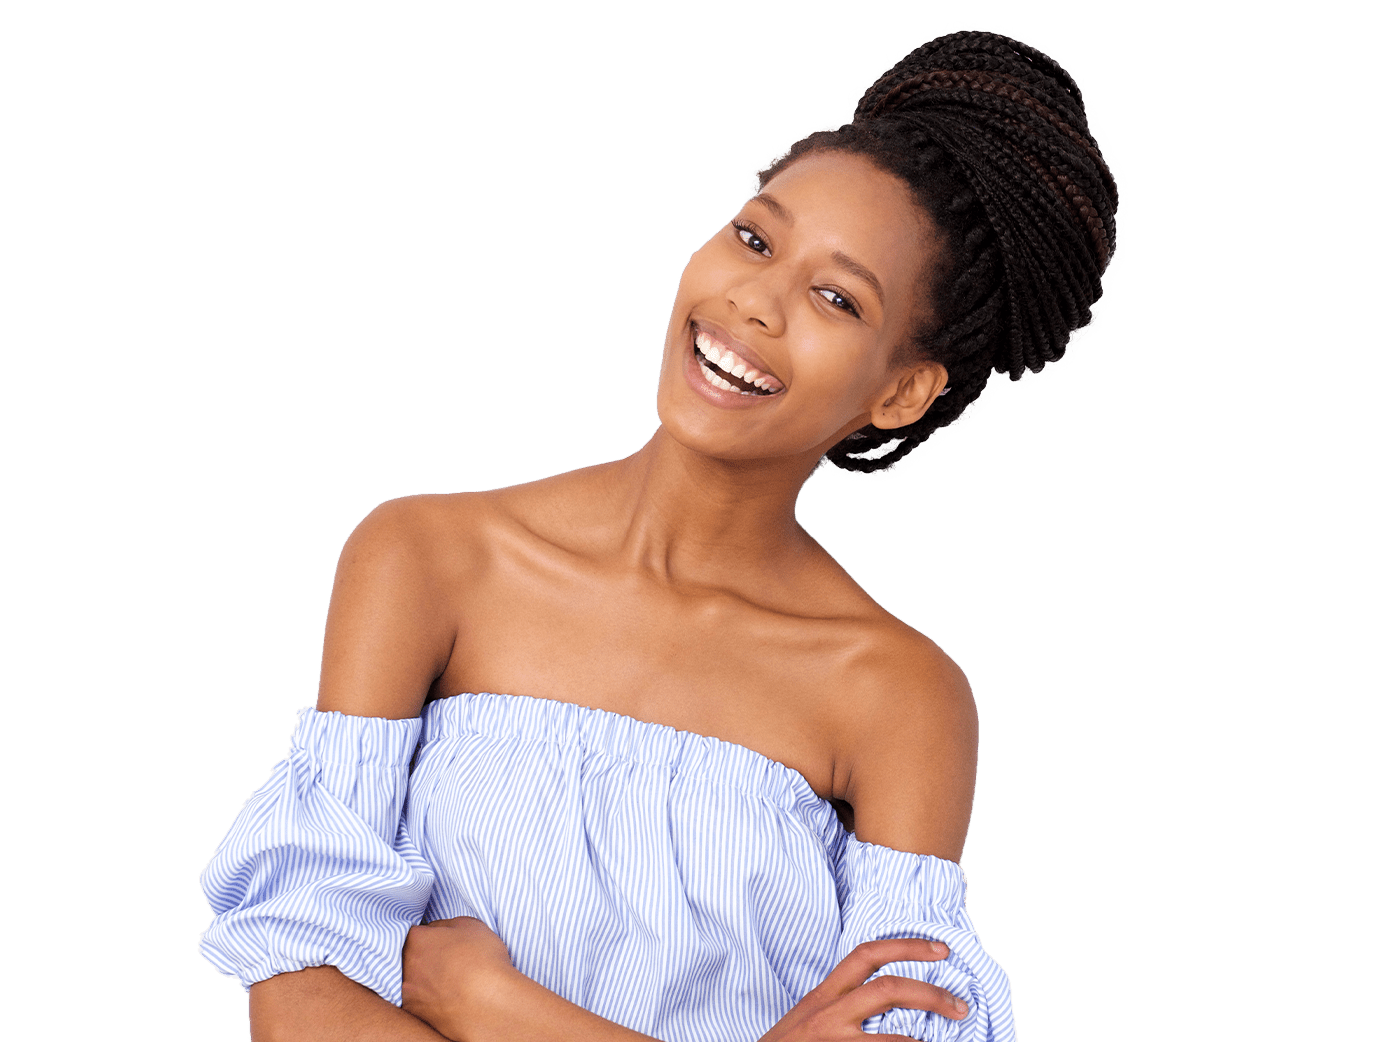 young woman with wrapped braids smiling